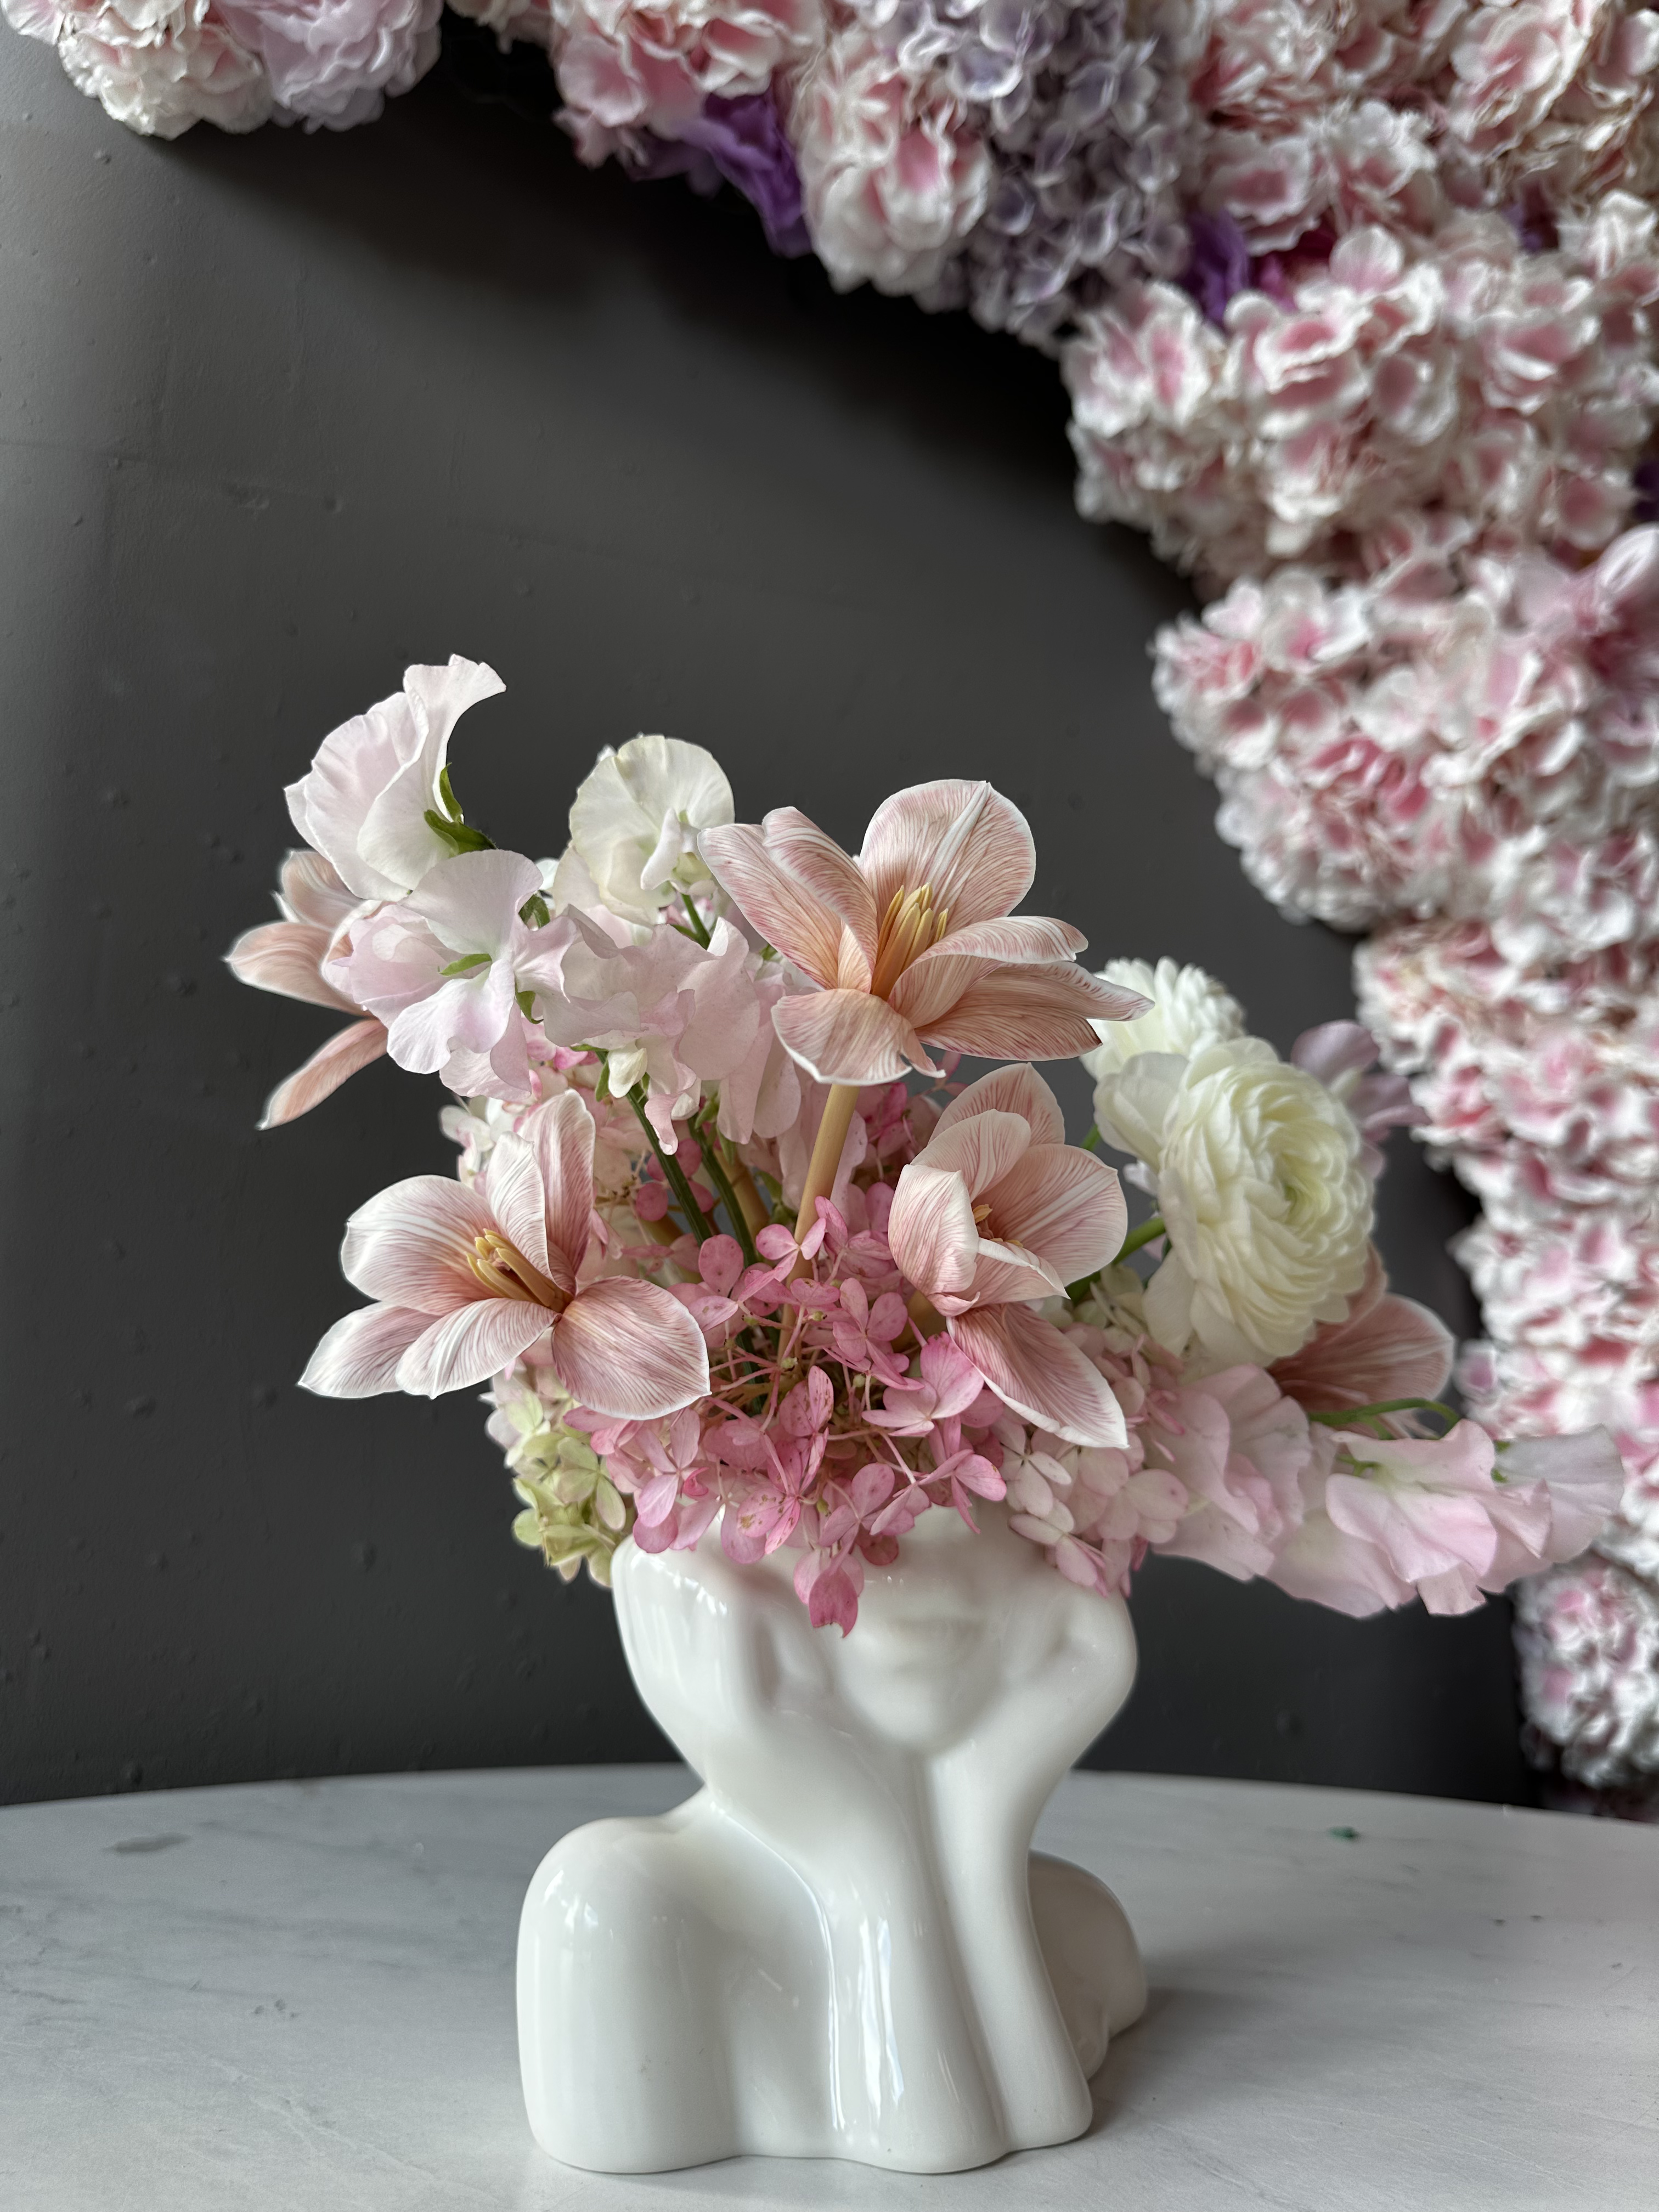 Lady in Blossom - Flower arrangement in a vase